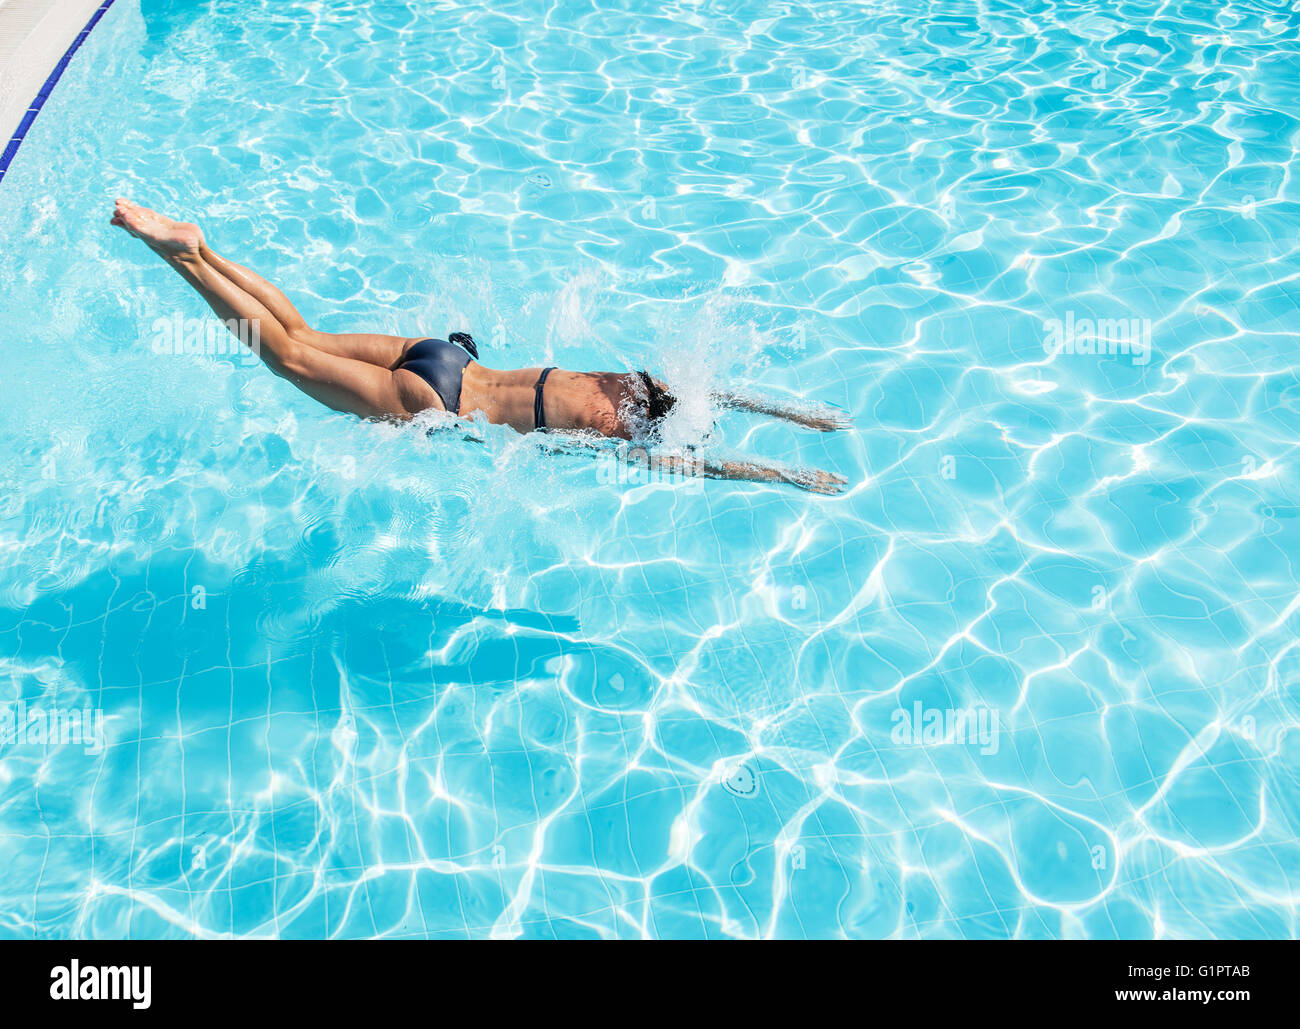 Woman jumping into the swimming pool. Stock Photo